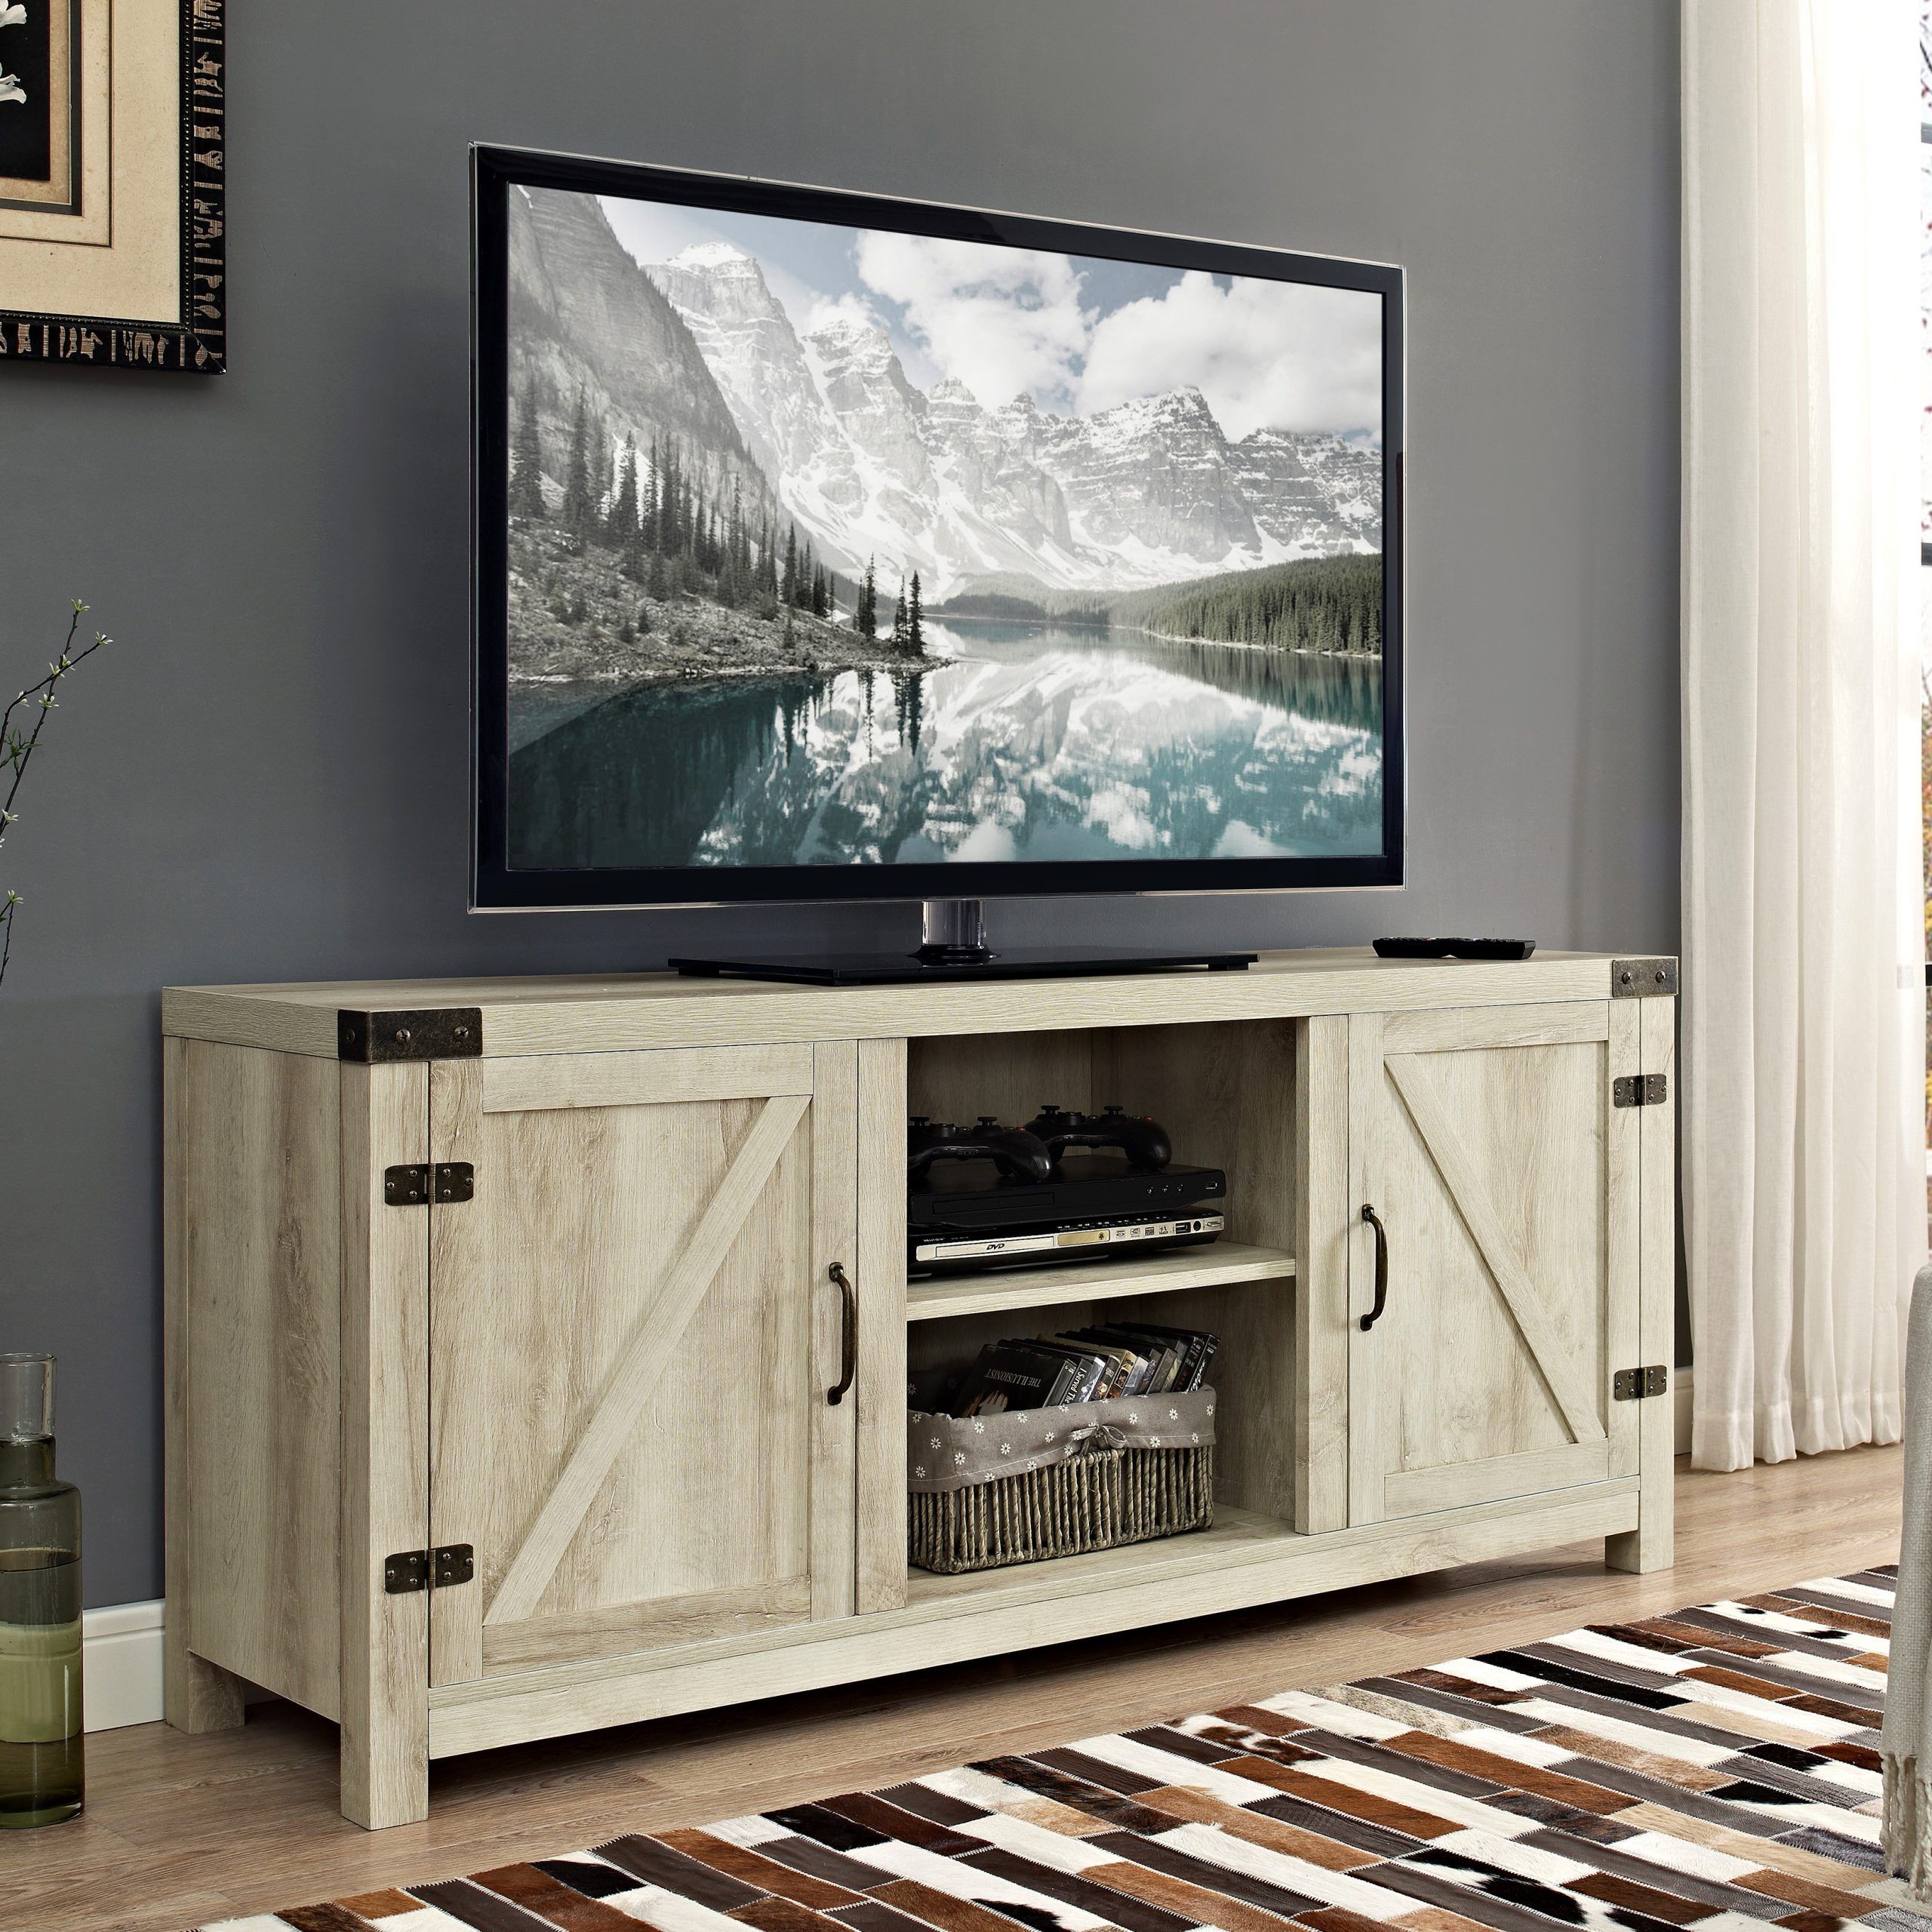 Woven Paths Modern Farmhouse Barn Door Tv Stand For Tvs Up Intended For Wolla Tv Stands For Tvs Up To 65" (View 8 of 15)